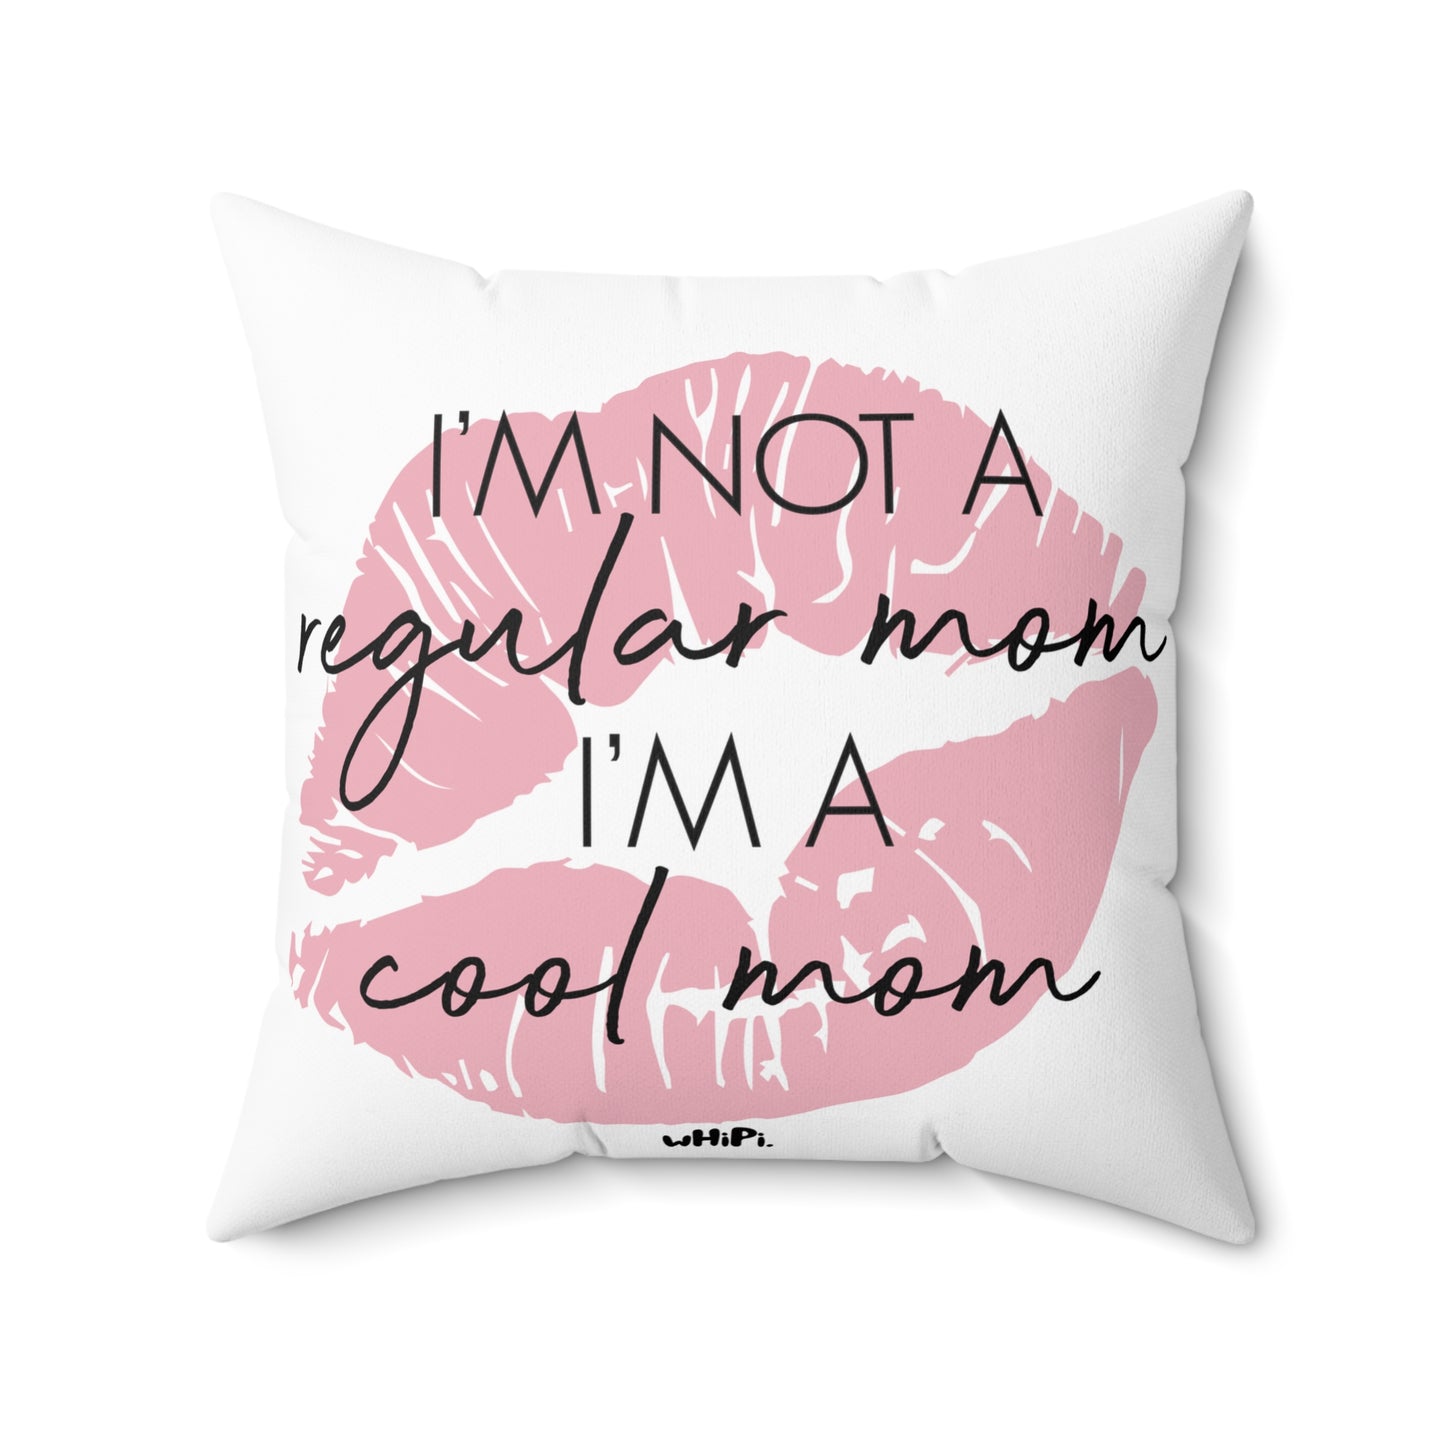 Cool Mom Square Pillow